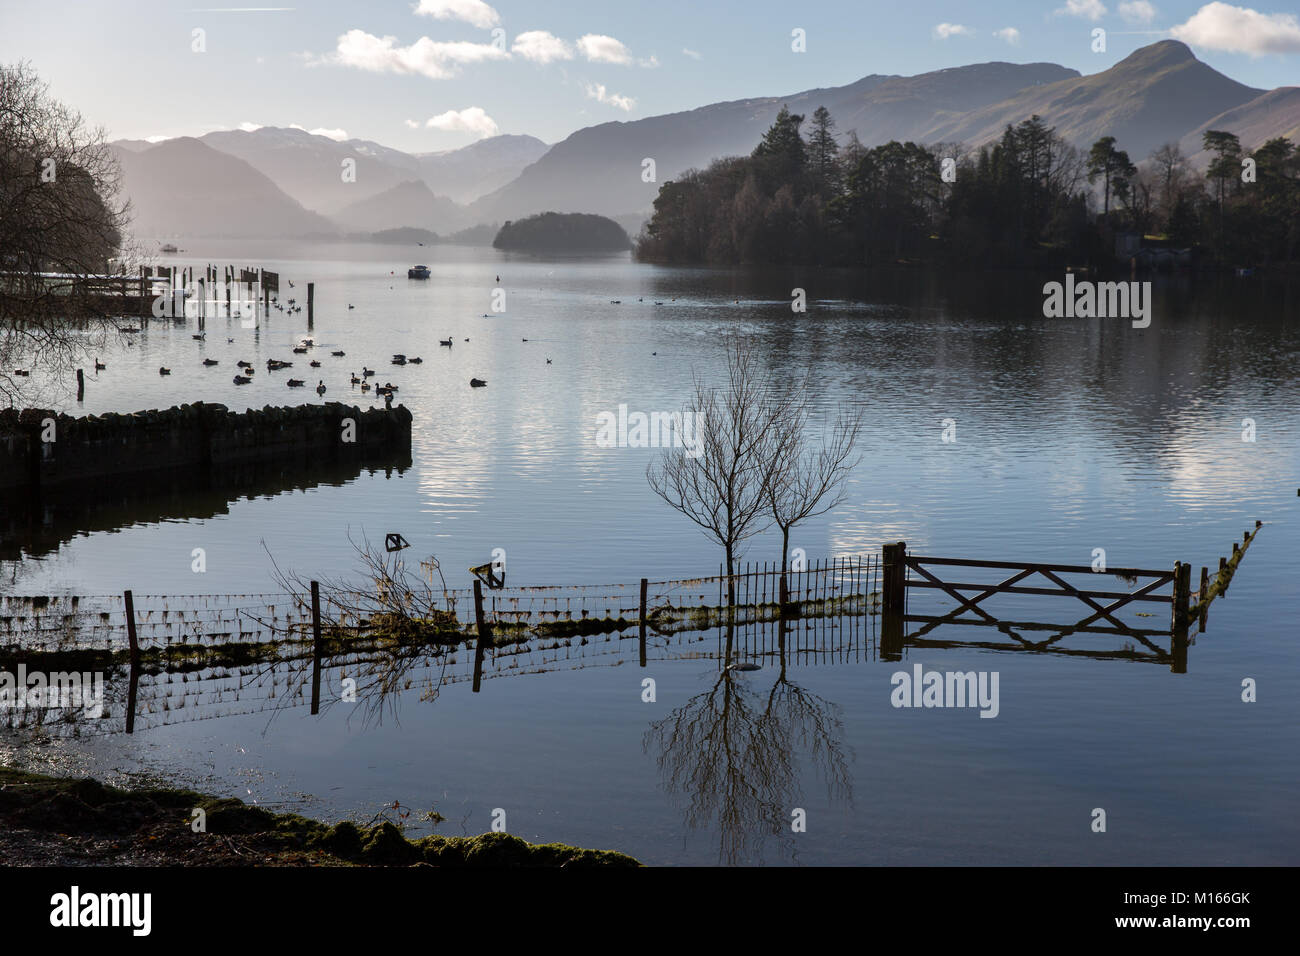 A flooded field on the banks of Derwent Water near Keswick after heavy rains Stock Photo